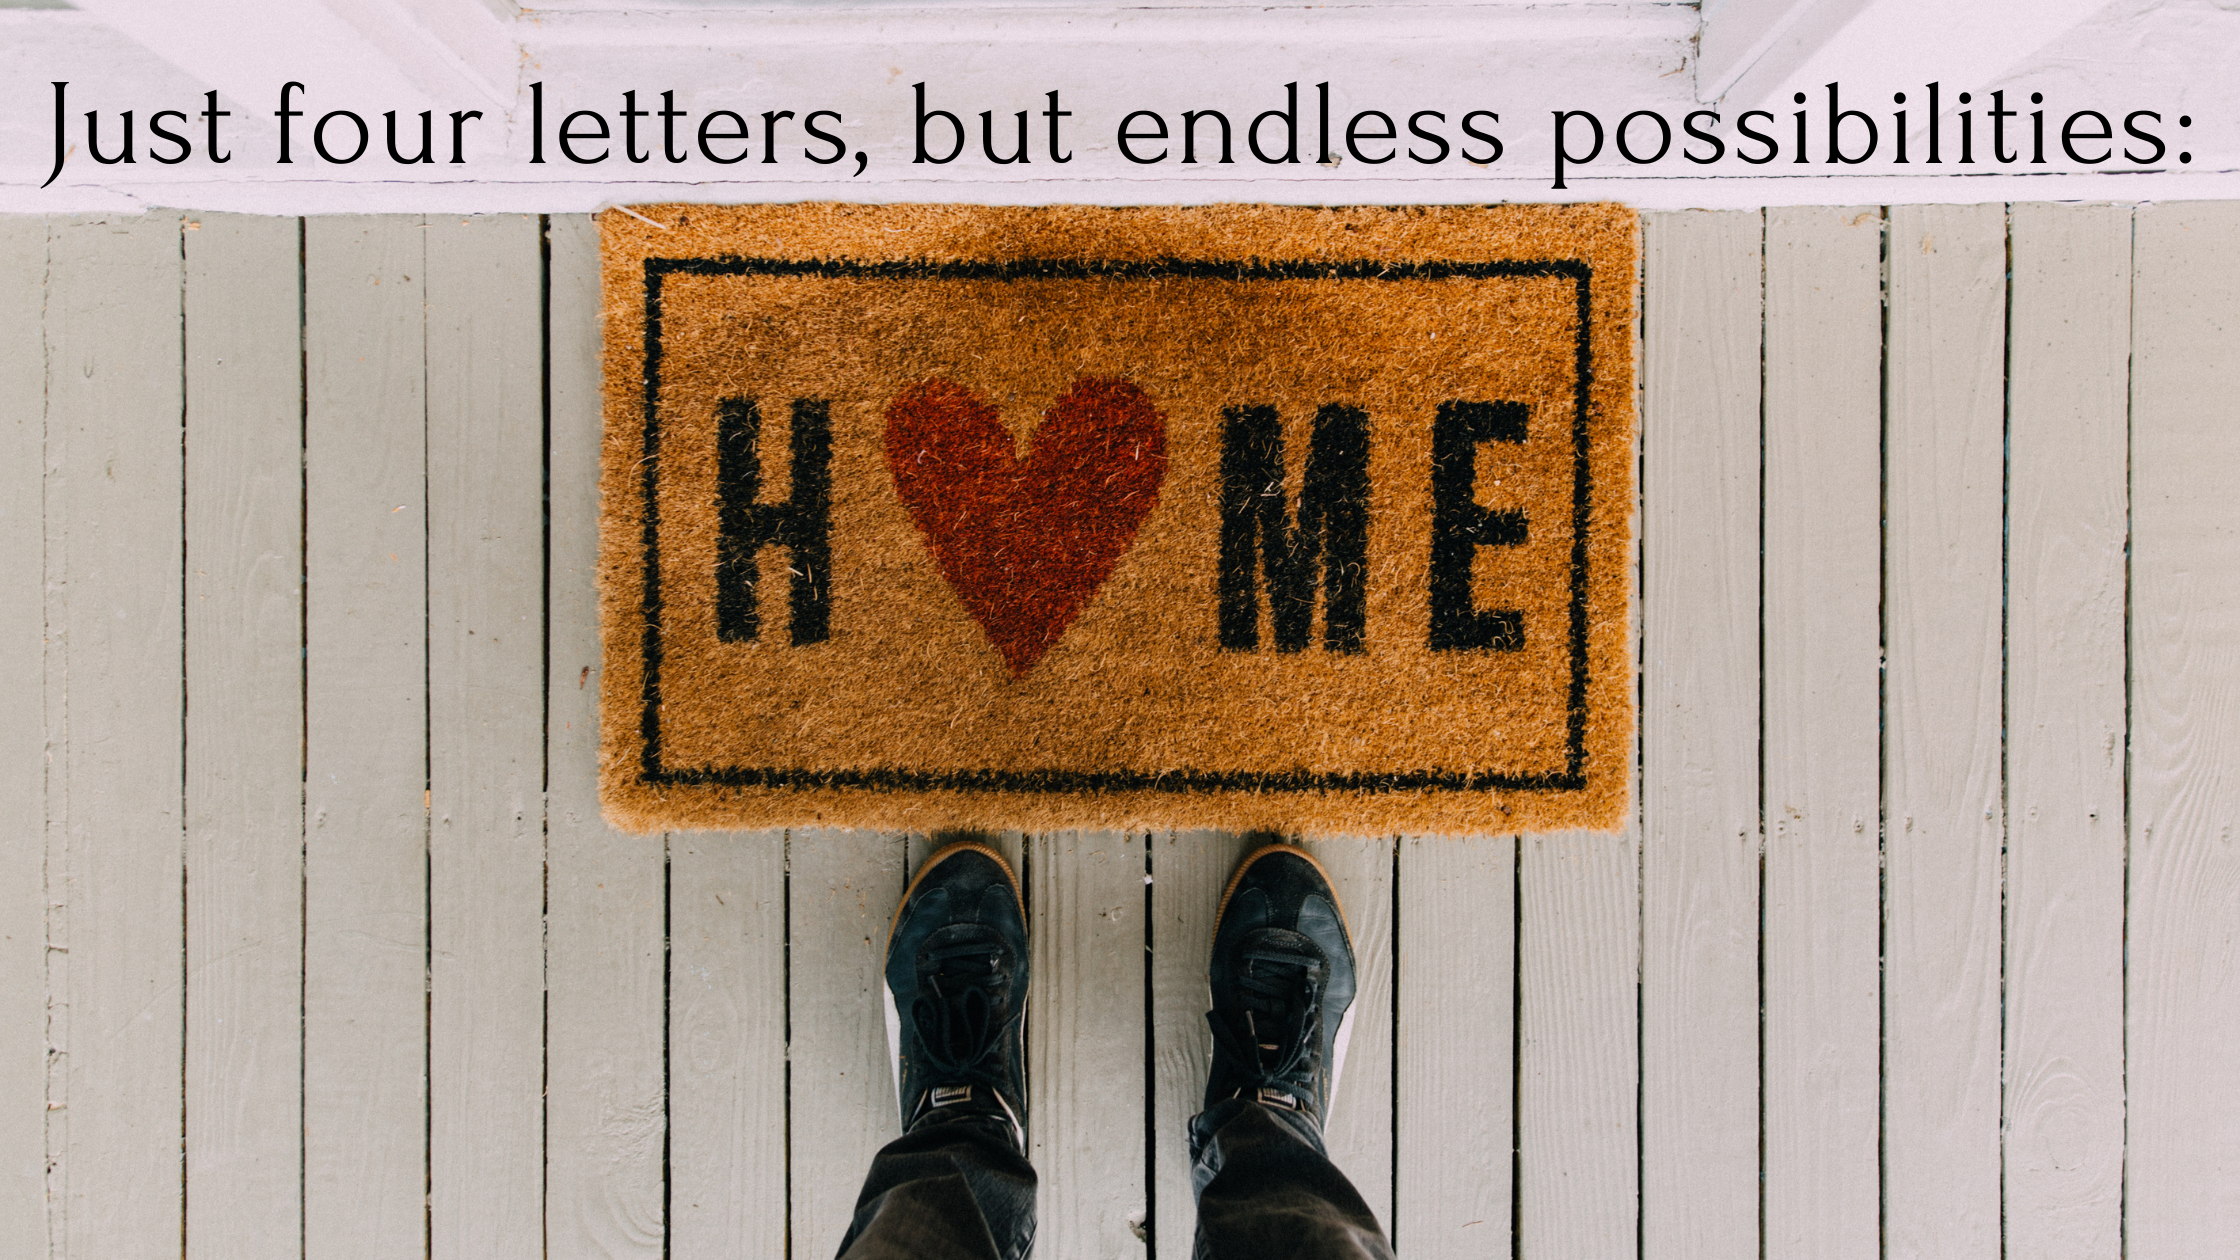 Just four letters, but endless possibilities home.